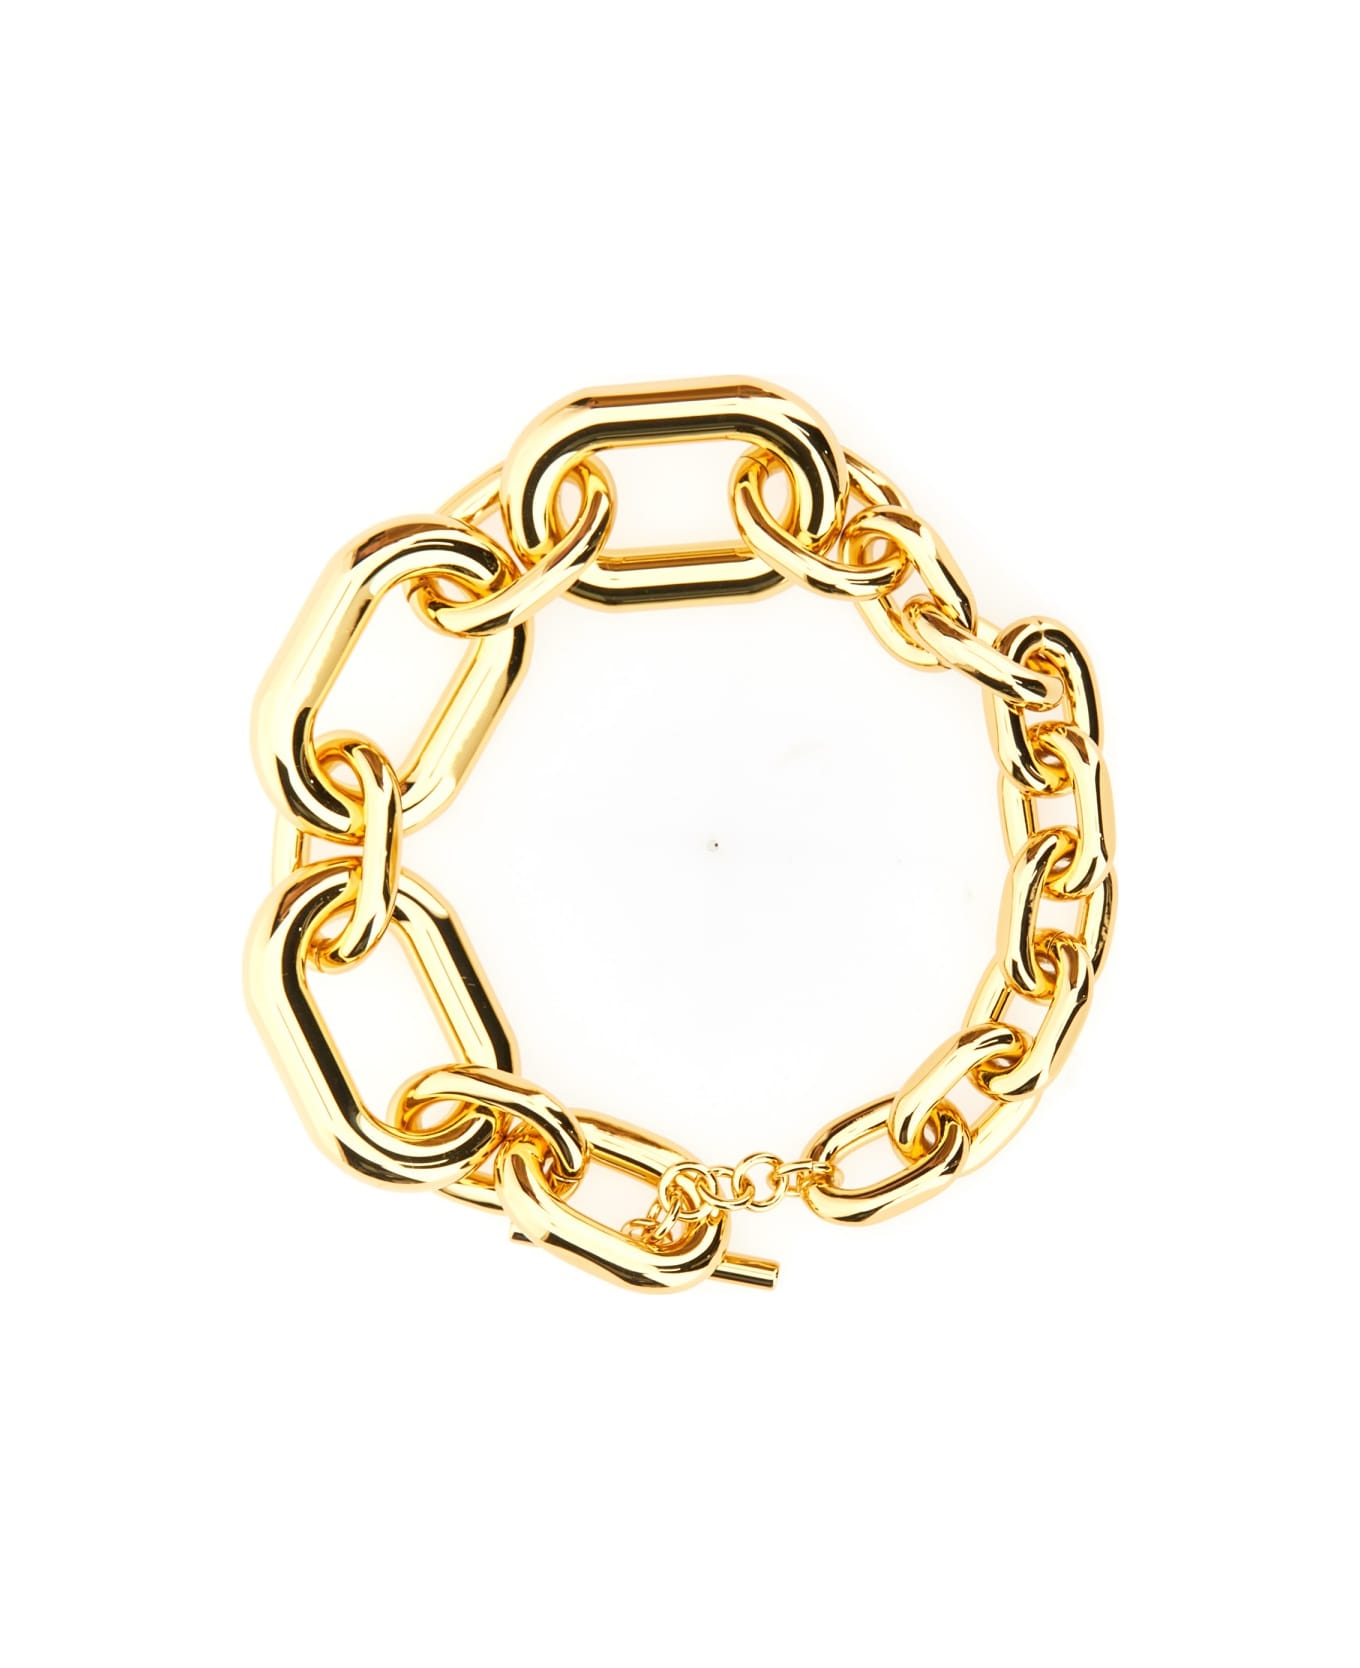 Paco Rabanne "xl Link" Necklace - GOLD ネックレス